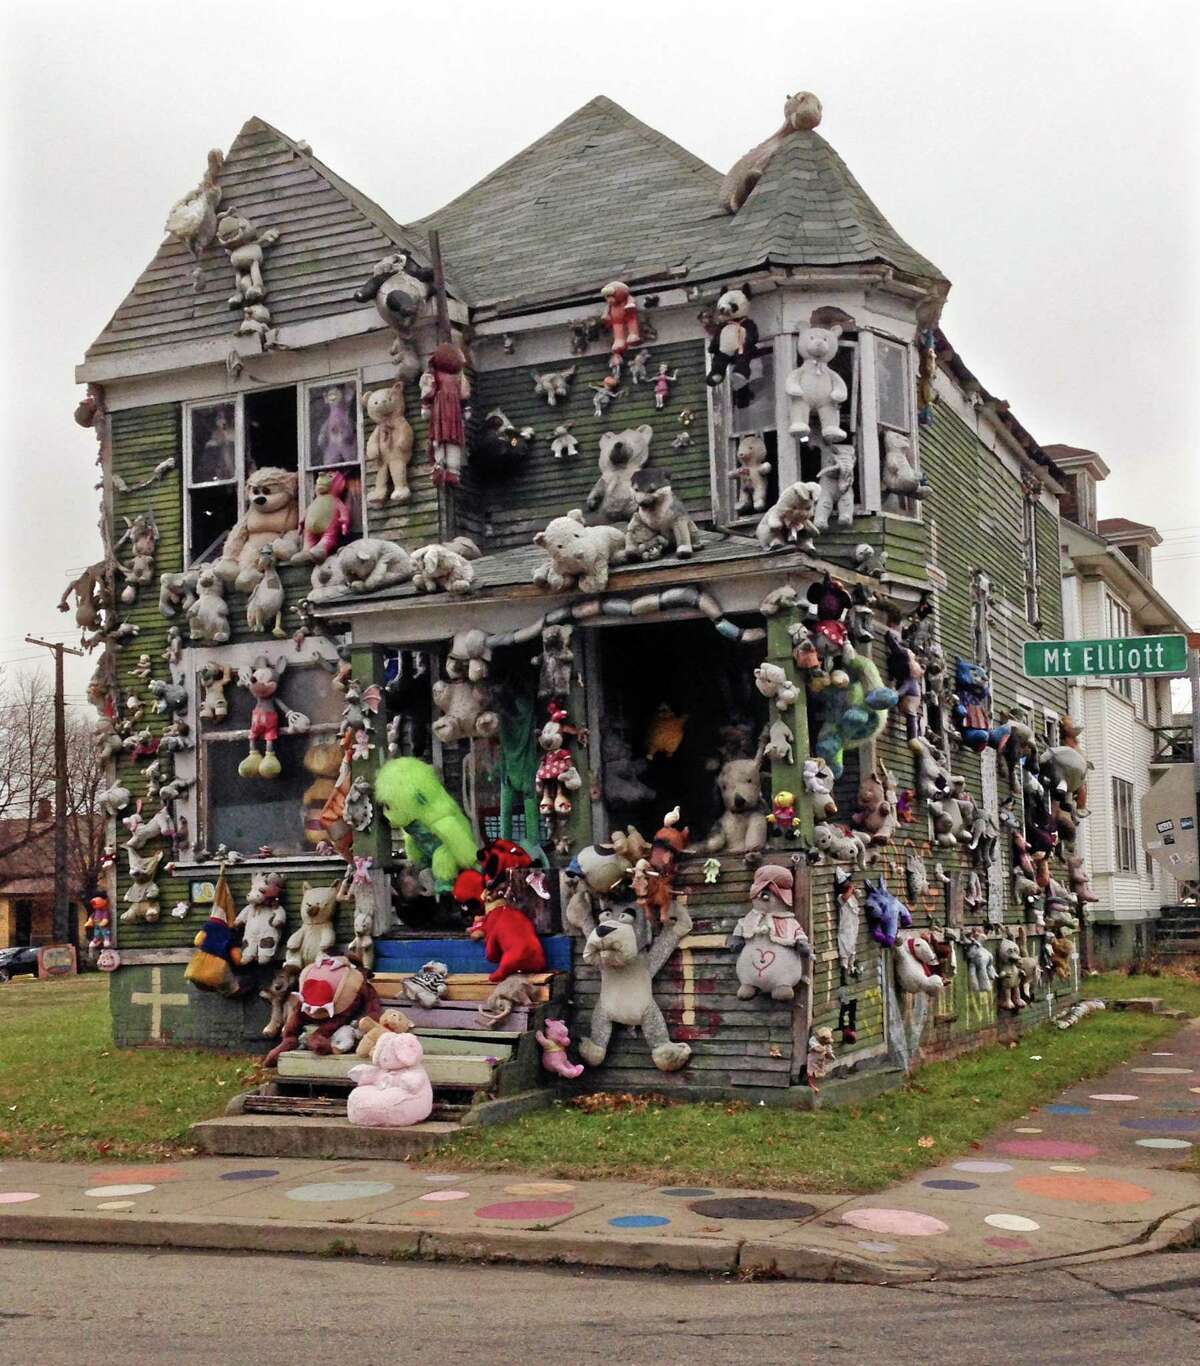 In this Nov. 21, 2013 photo, stuffed animals are seen attached to "The Party Animal House" in the Heidelberg Art Project in Detroit. Another fire has burned a house that's part of the outdoor art installation. WDIV-TV reports that the fire department responded early Friday, March 7, 2014 to the fire on the city's east side that destroyed the building. "The Heidelberg Project has been the target of at least eight earlier suspicious fires. There have been no arrests related to the fires that started in May 2013, but local and federal officials are investigating. Tyree Guyton founded the east-side project in 1986 as a response to urban decay. (AP Photo/Carlos Osorio)